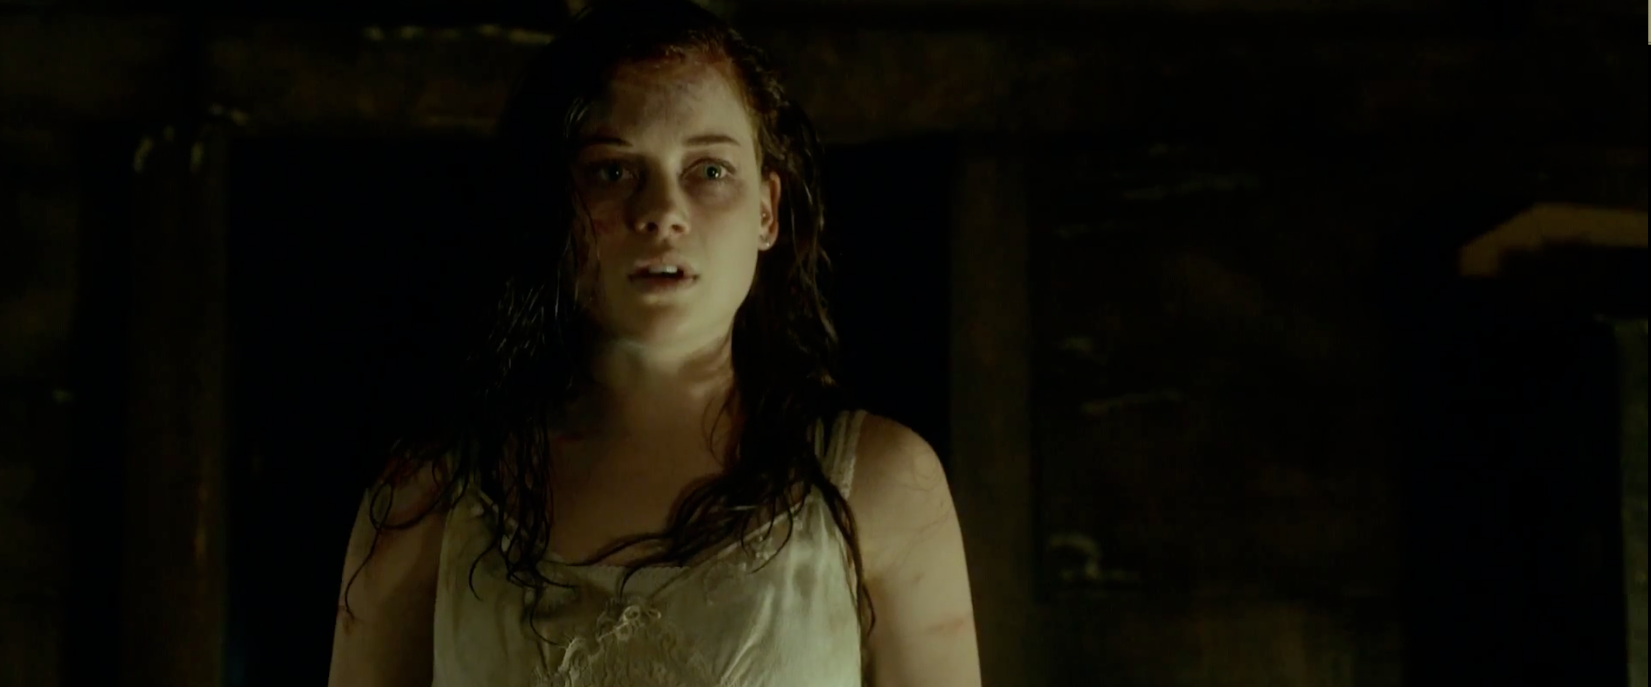 Latest 'Evil Dead' Clip Enters Mia, and the Cabin... - Bloody Disgusting